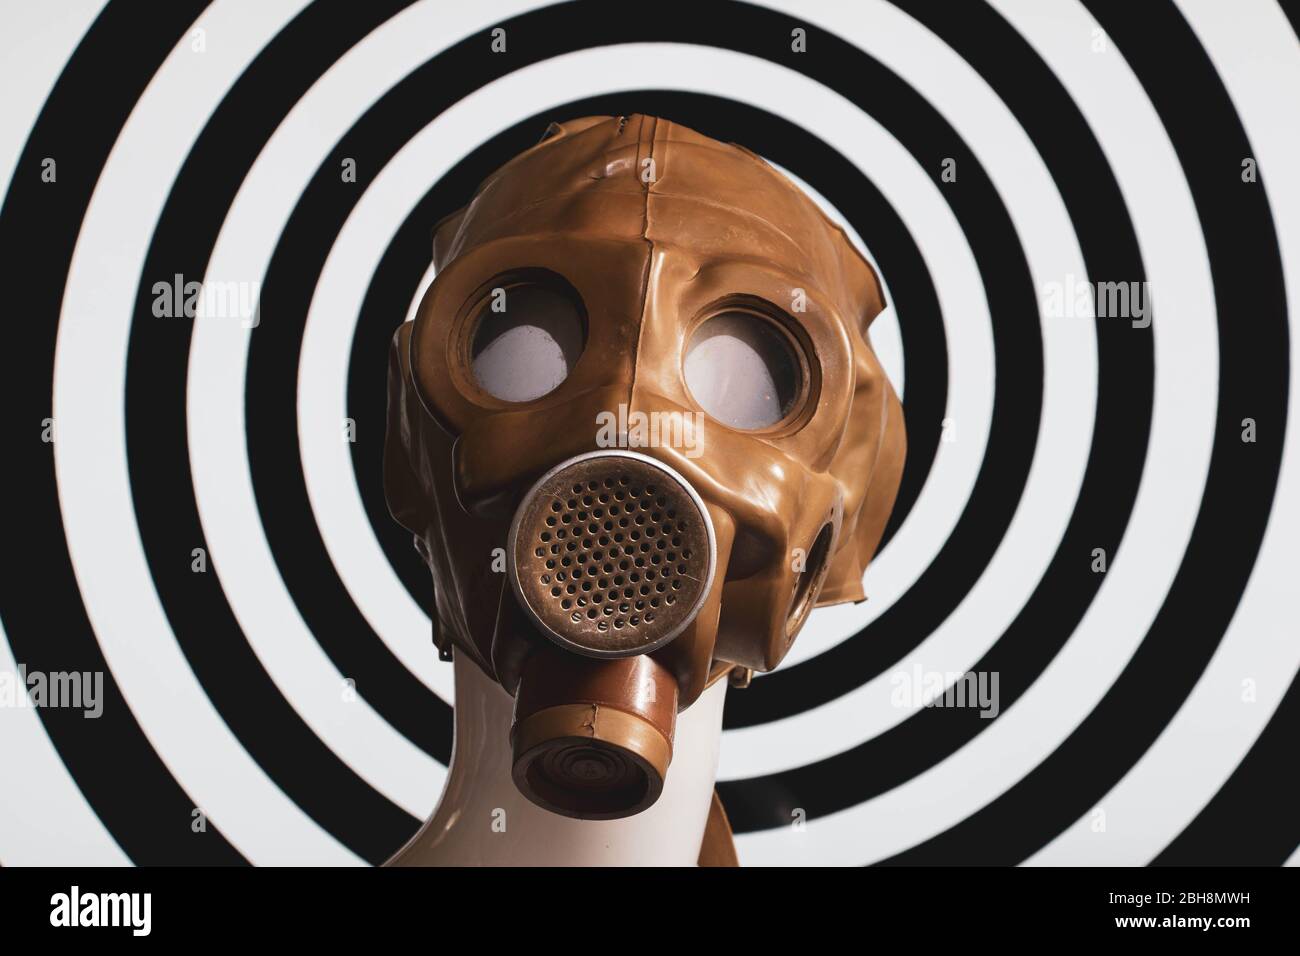 White mannequin wearing a vintage rubber gas mask against a black and white hypnotic spiral background. Stock Photo